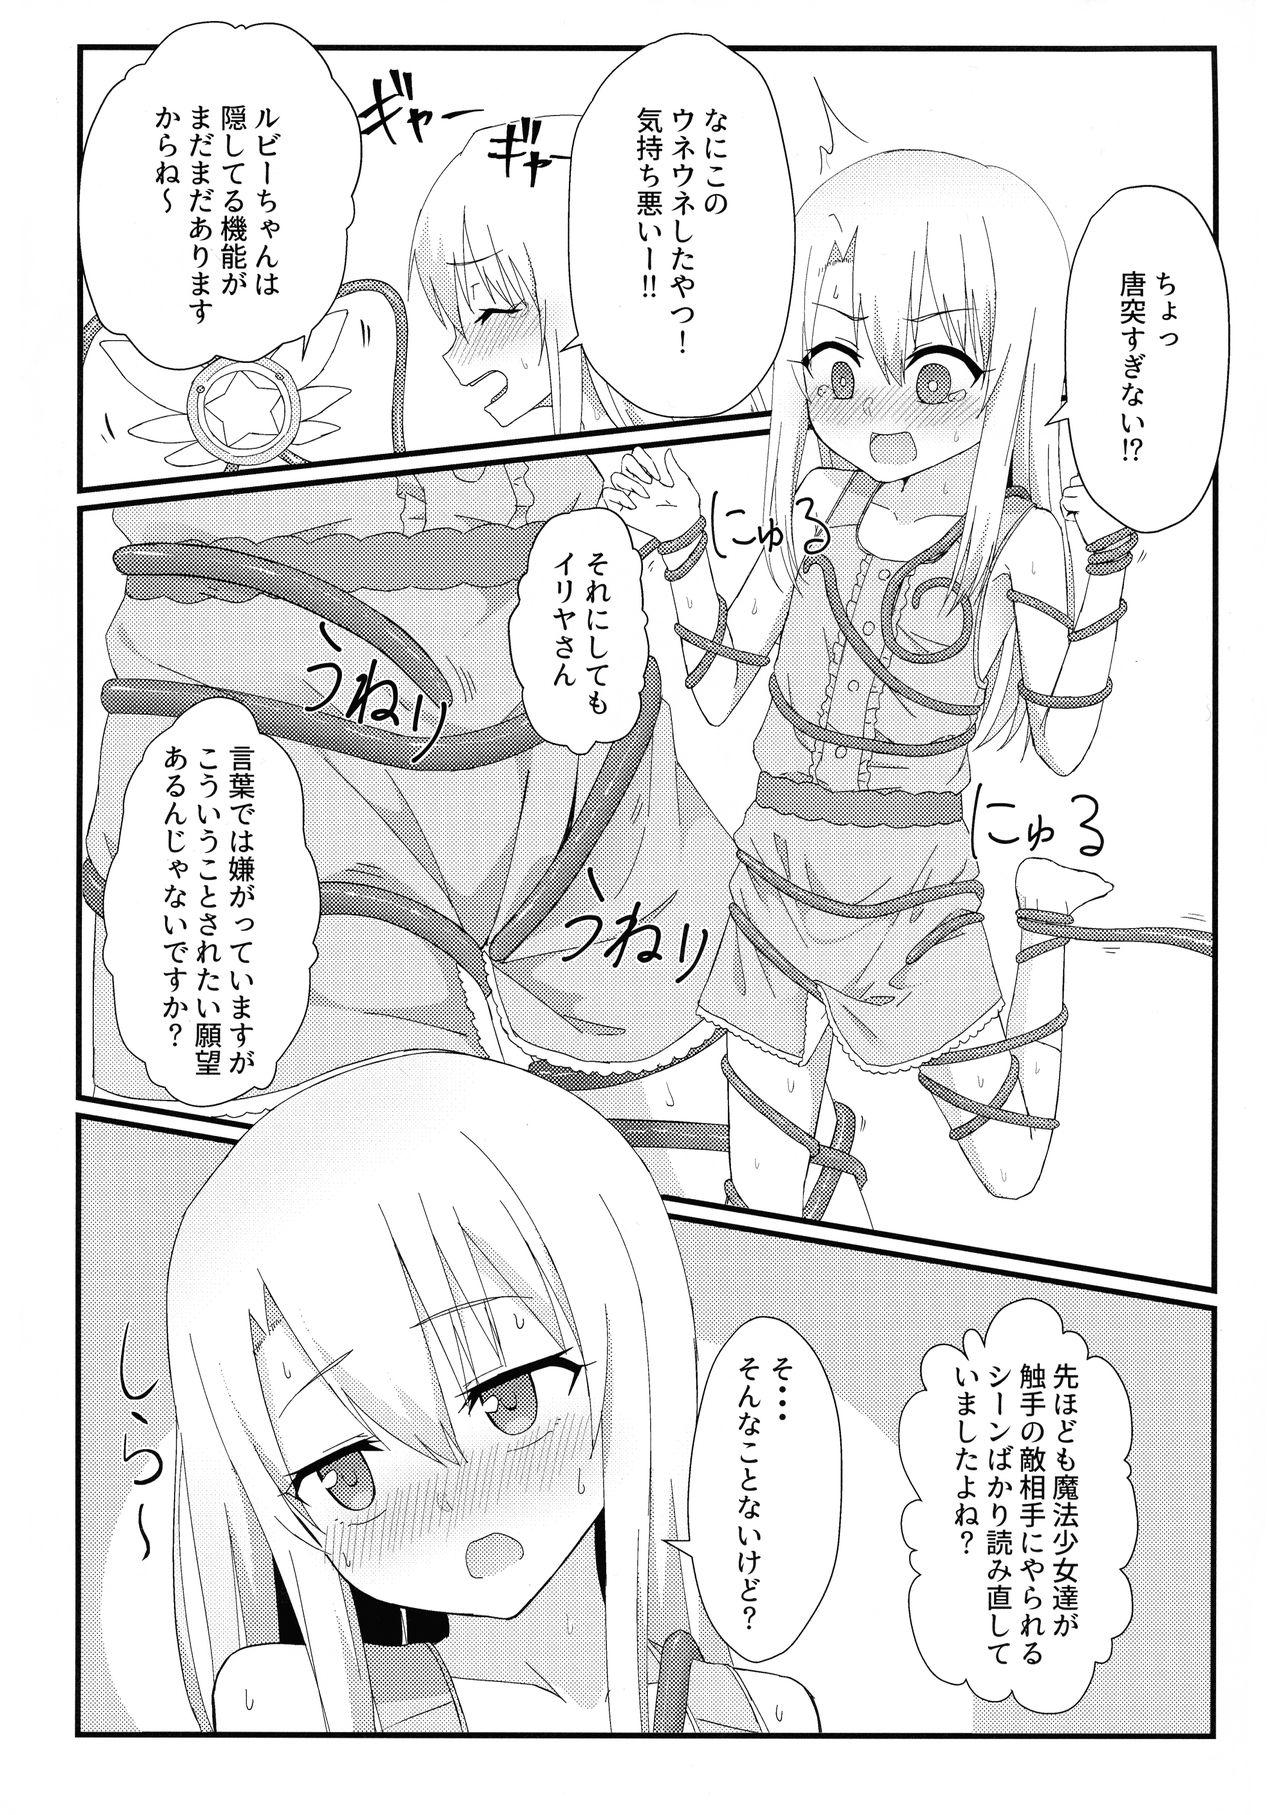 Adolescente Illya to Ruby Etchi Etchi Secret Function - Fate kaleid liner prisma illya Ass - Page 4